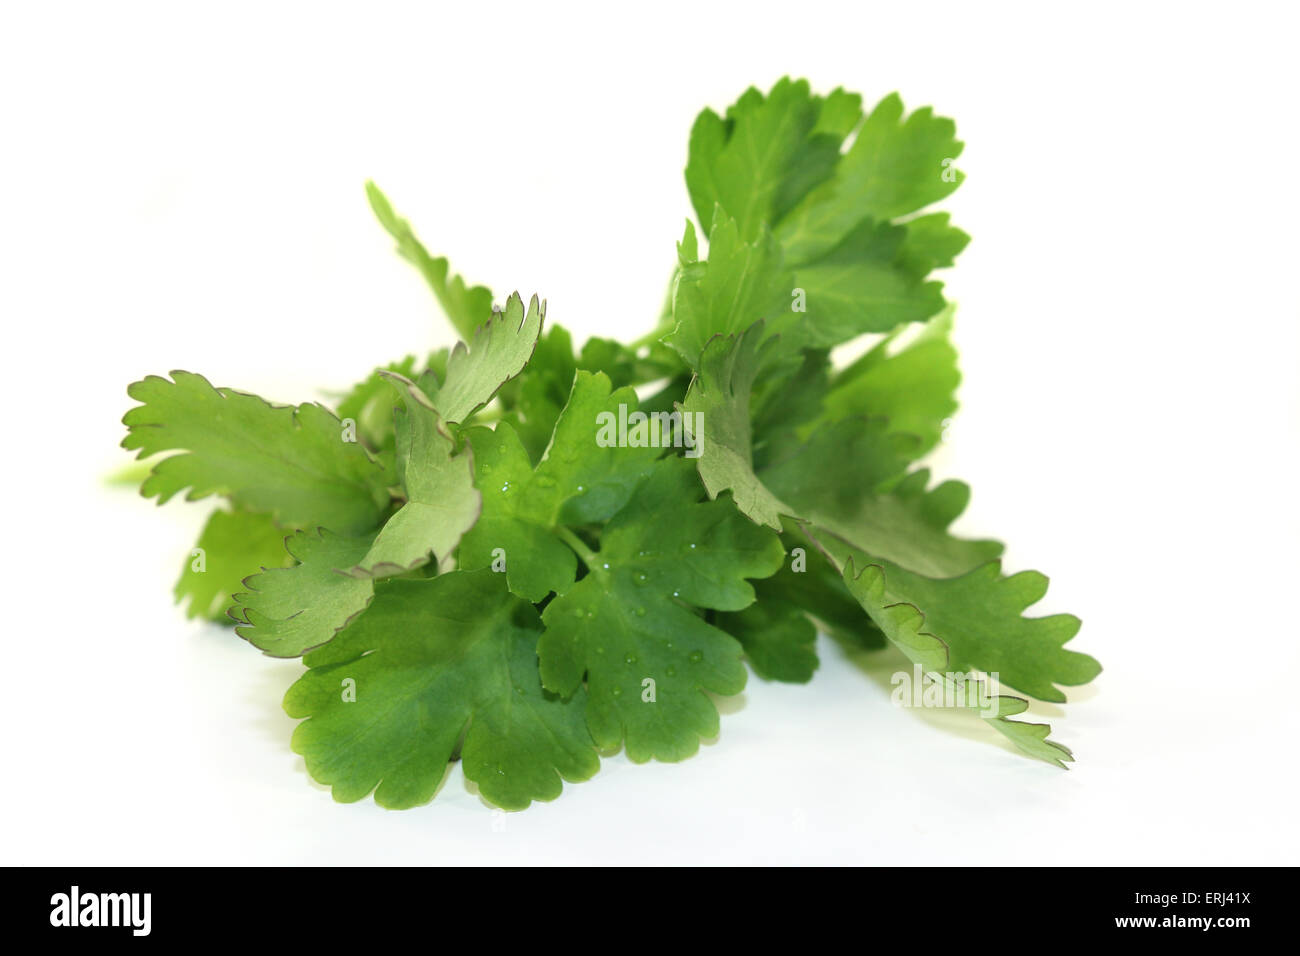 green bunch of Arugula on a light background Stock Photo